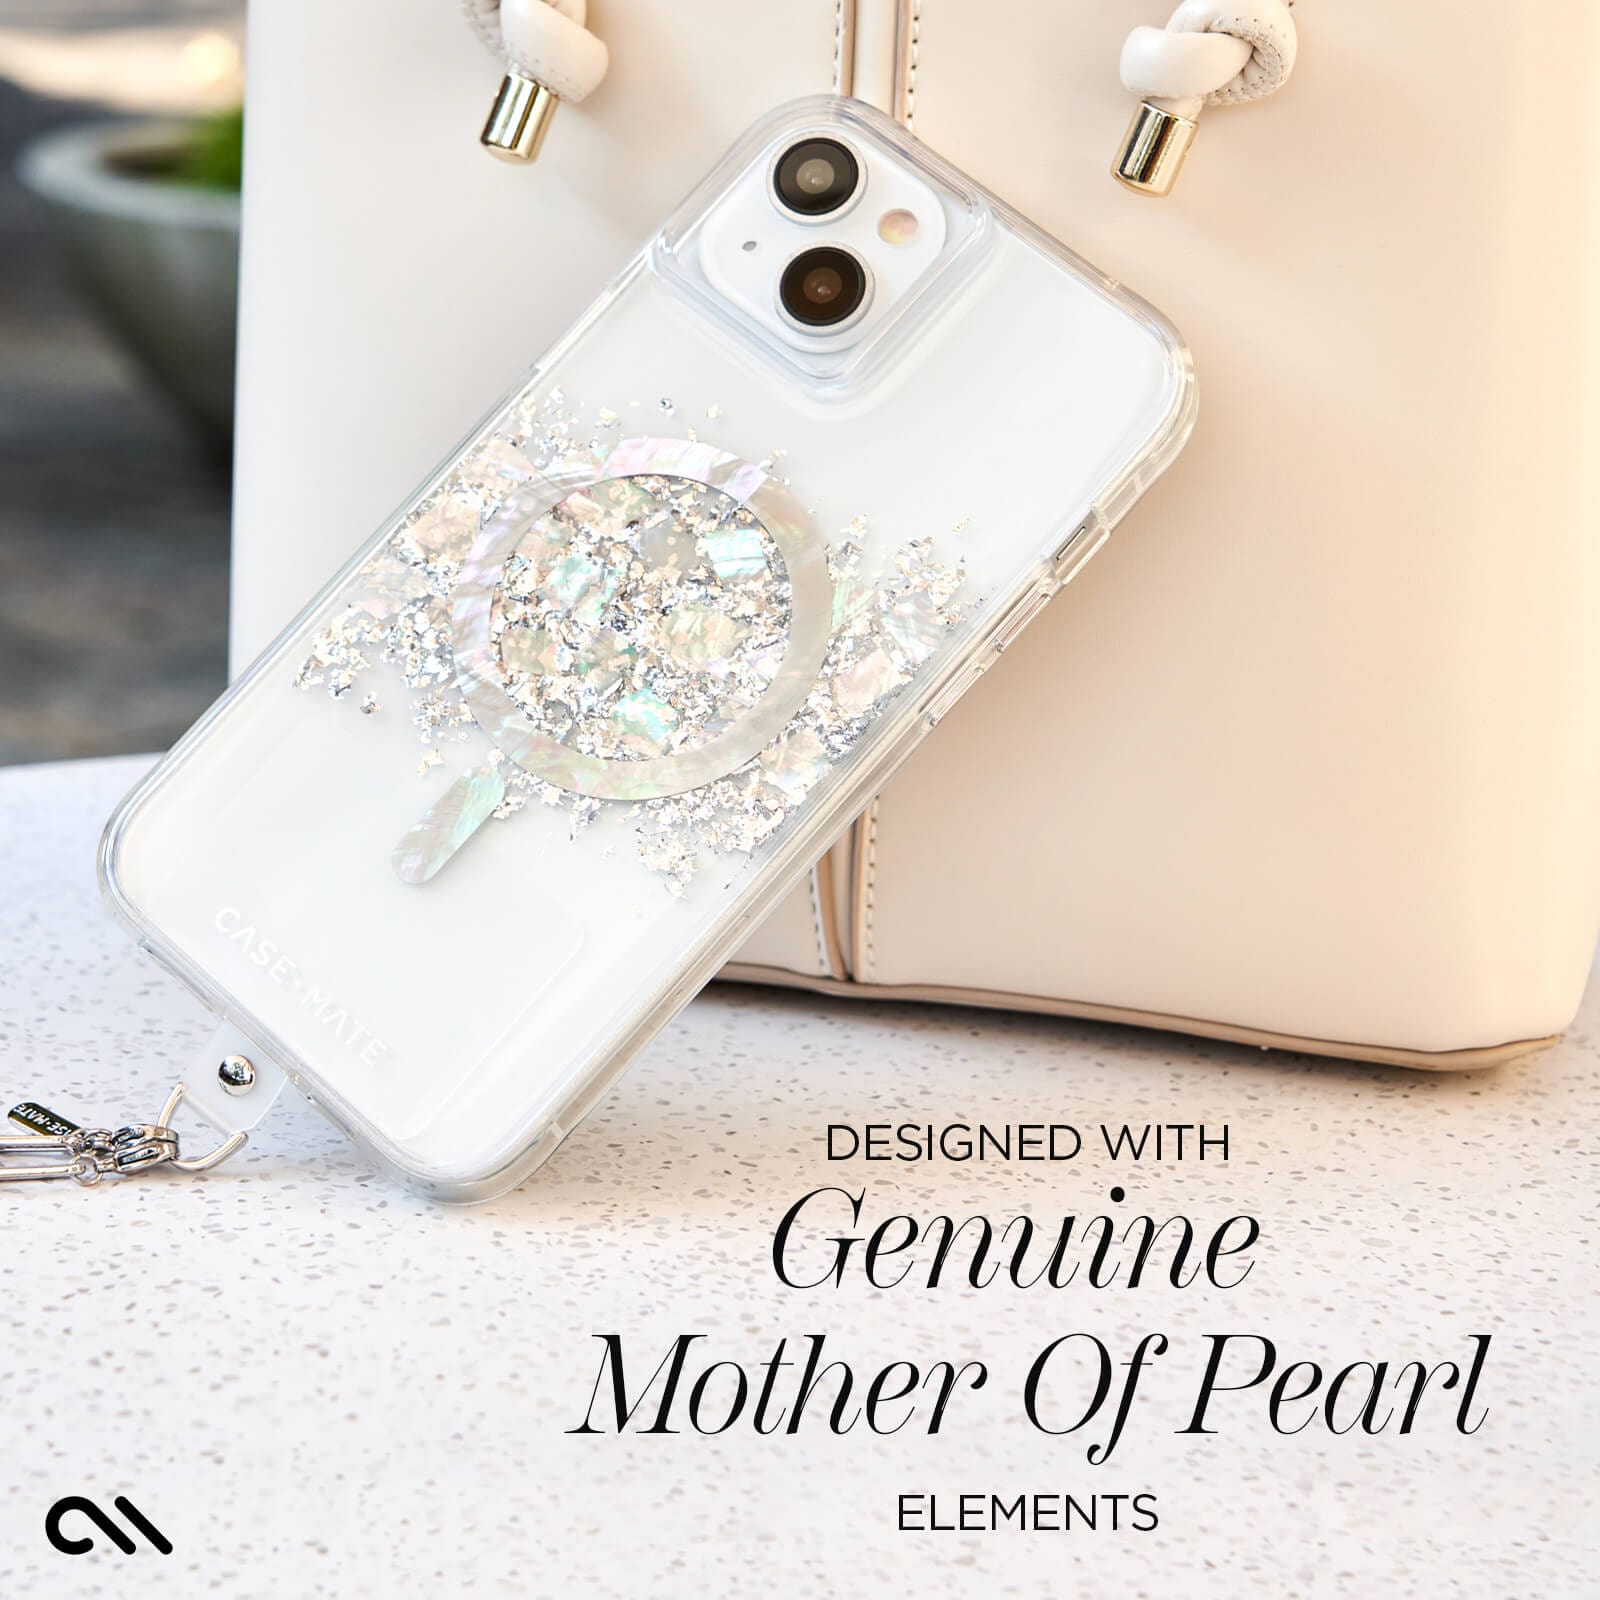 DESIGNED WITH GENUINE MOTHER OF PEARL ELEMENTS